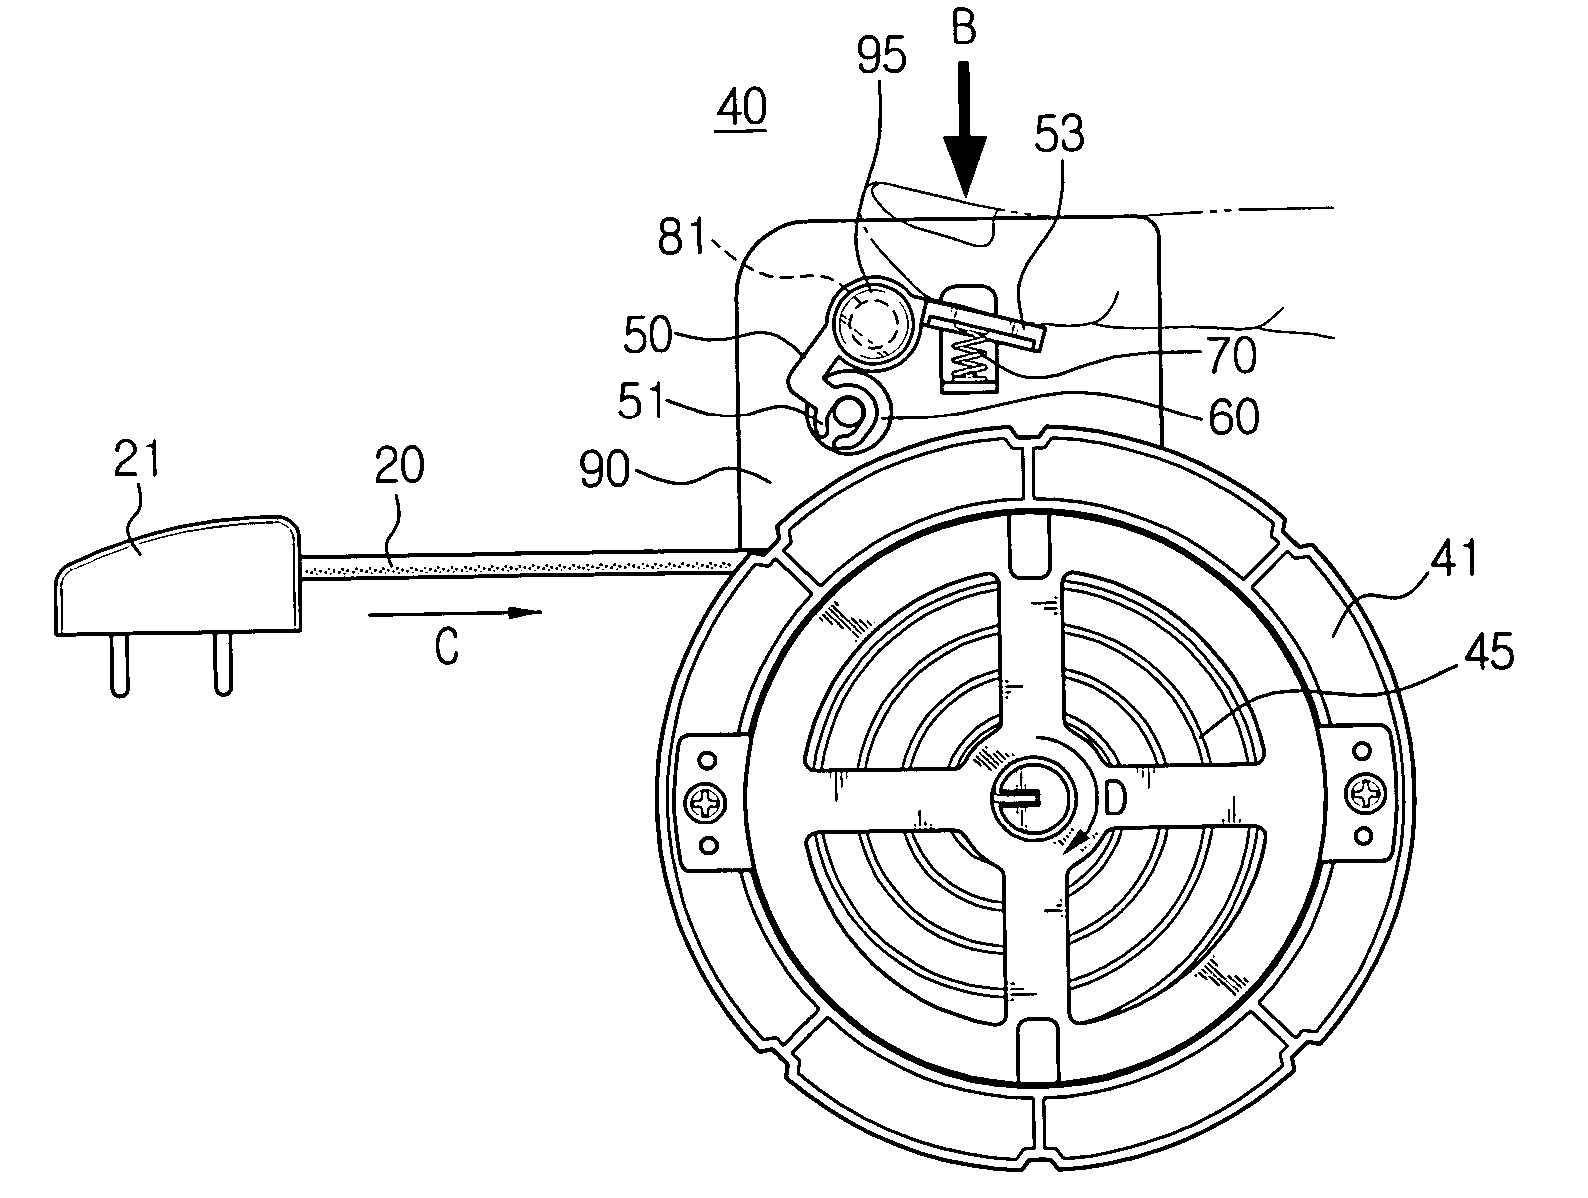 Cord-reel assembly for electronic devices